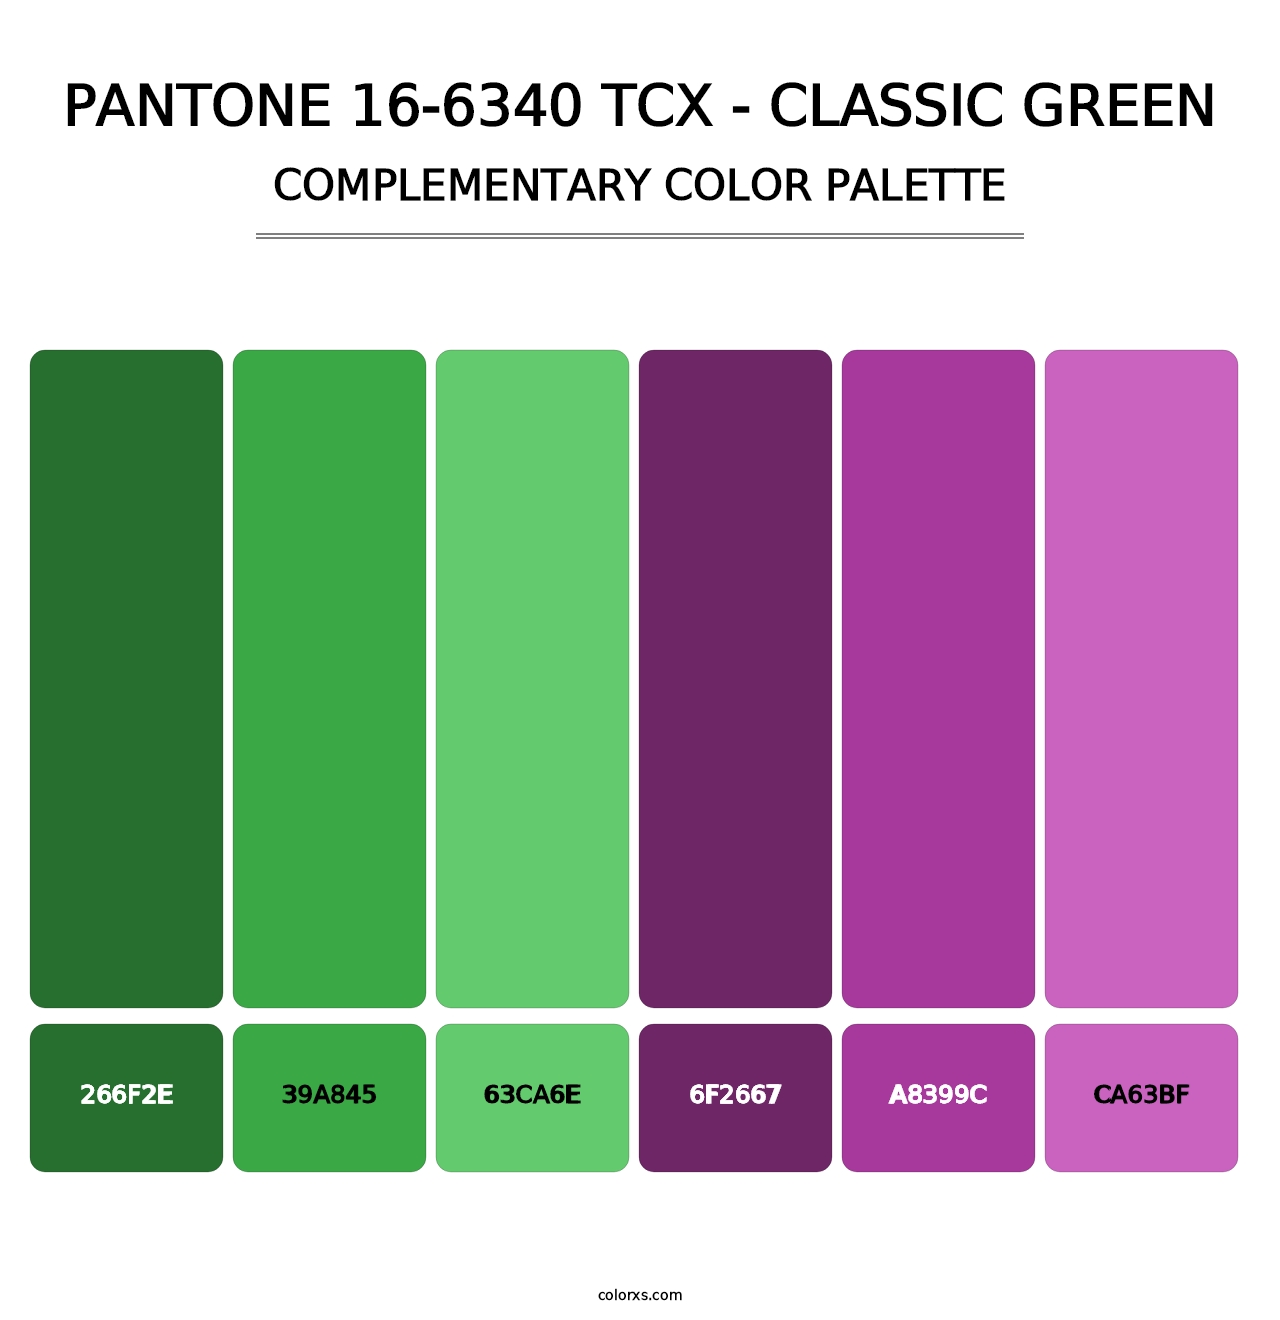 PANTONE 16-6340 TCX - Classic Green - Complementary Color Palette